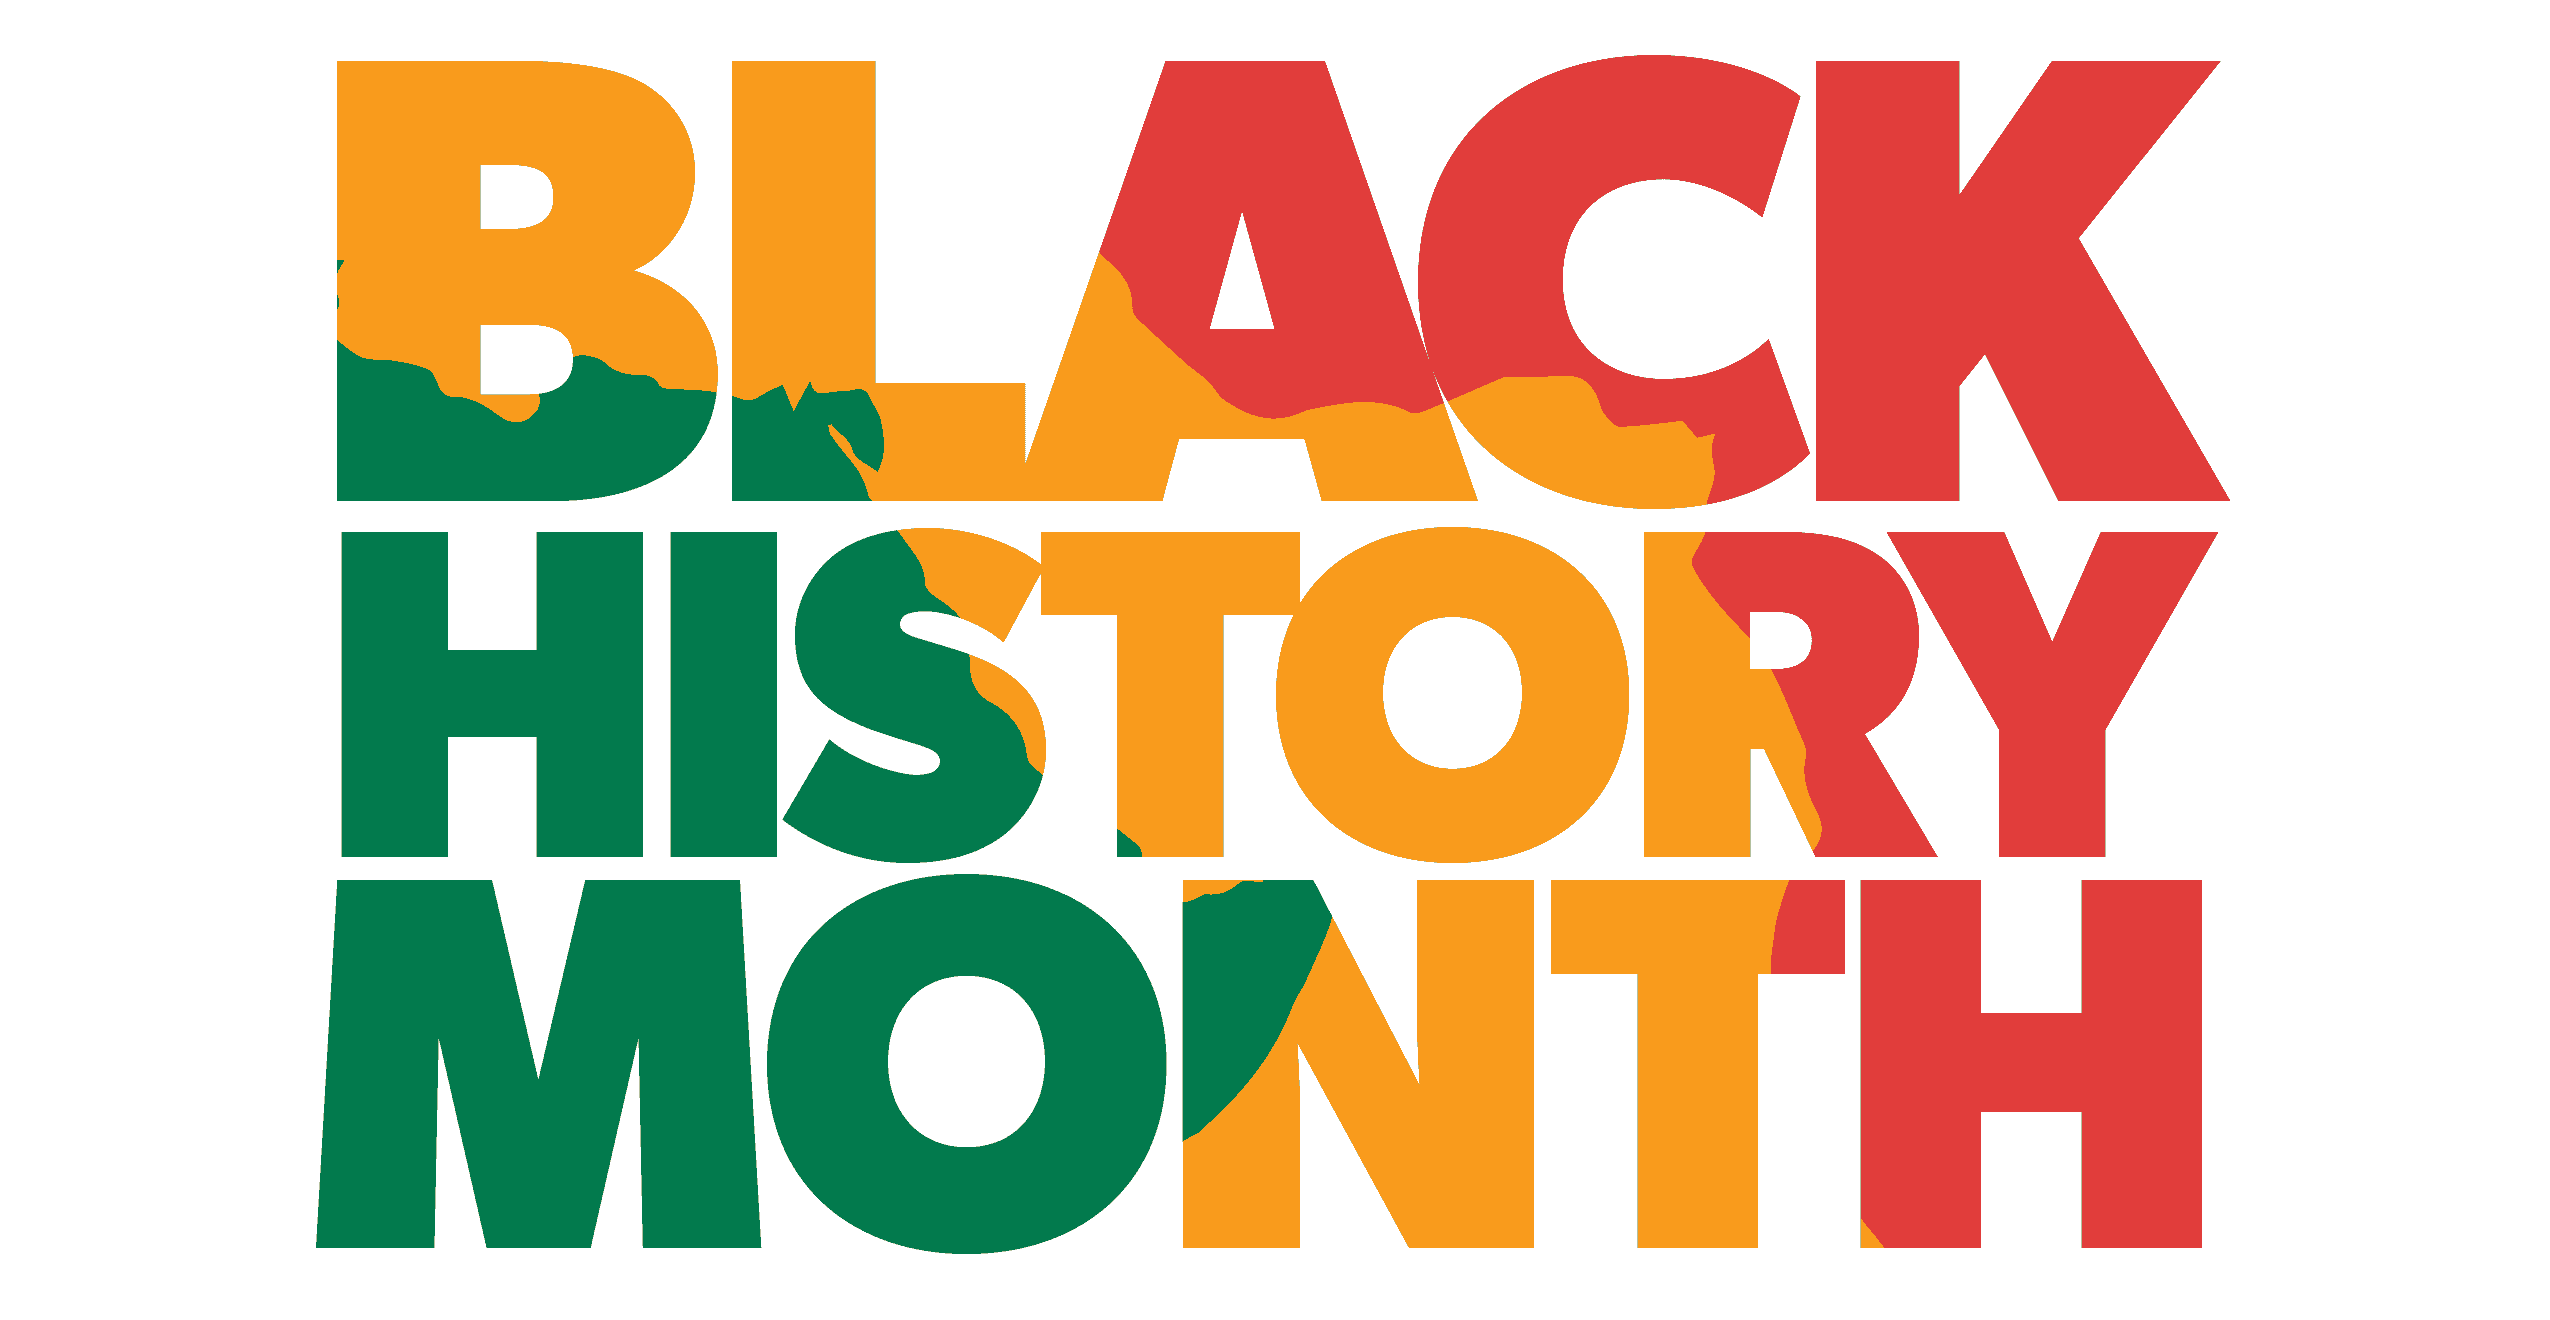 SGTC Library creates Library Guide for community to learn more about Black History Month.